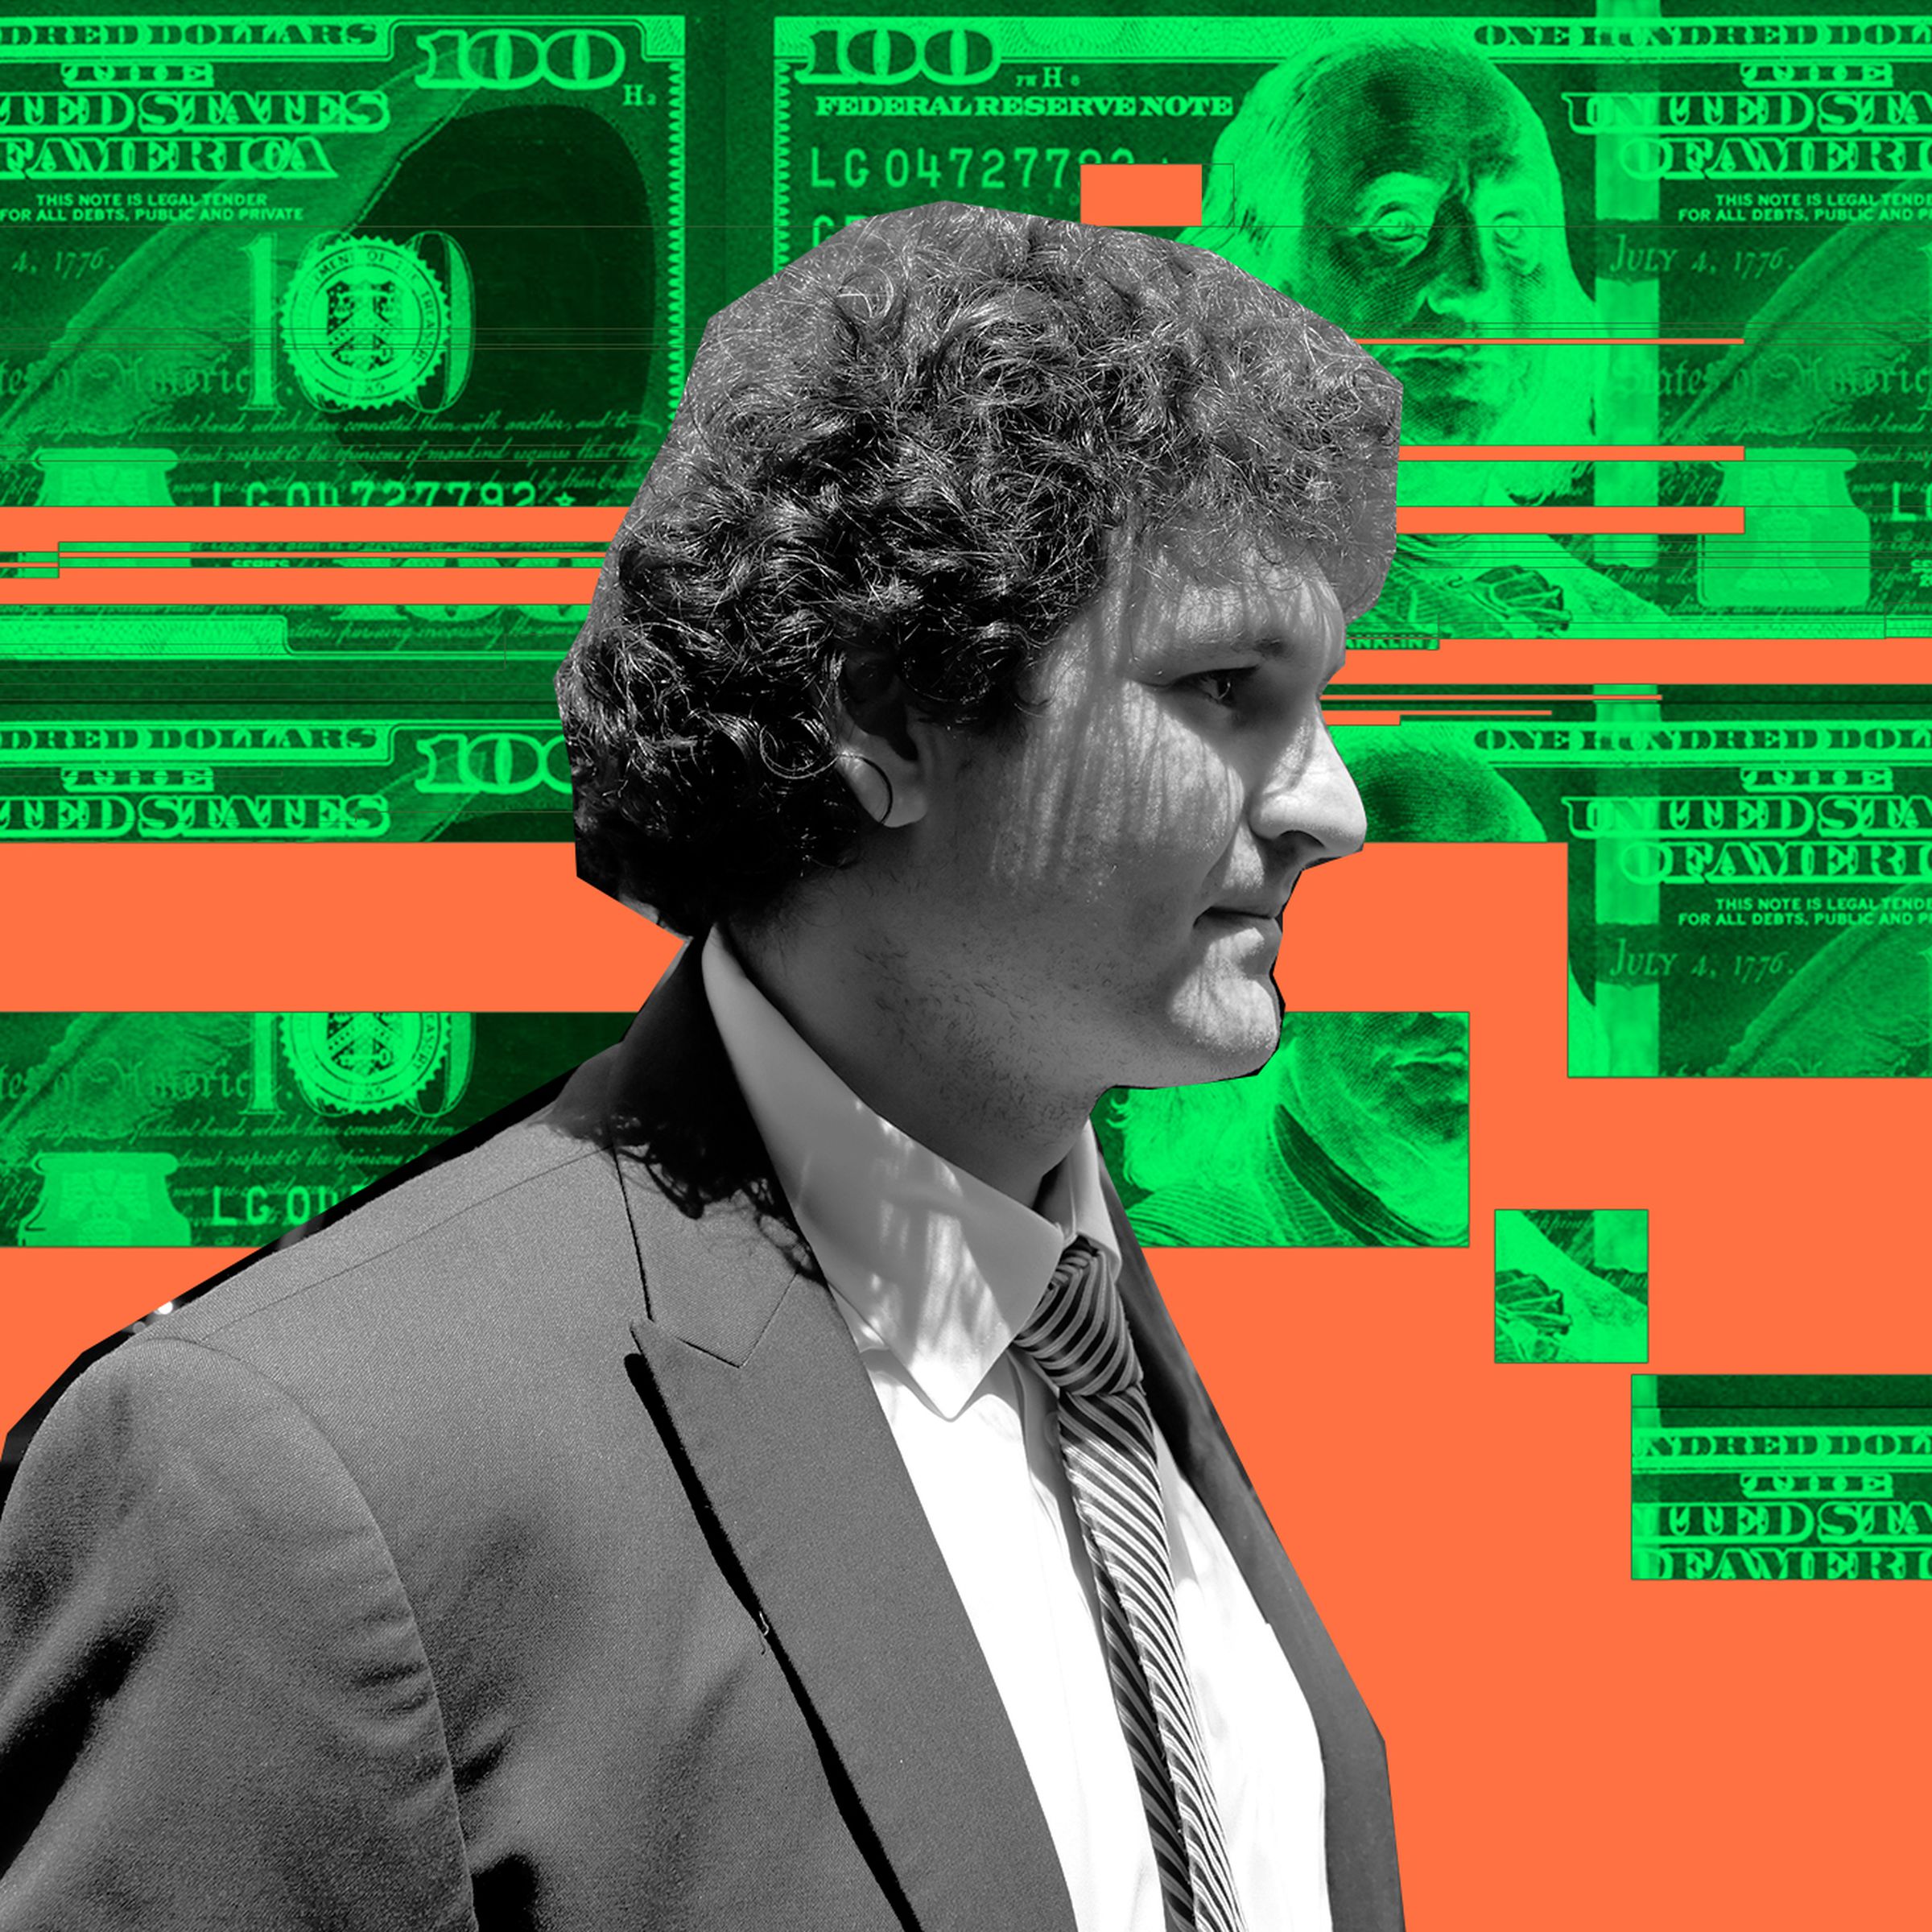 Photo Illustration of Sam Bankman-Fried in front of a graphic background of inverted money.